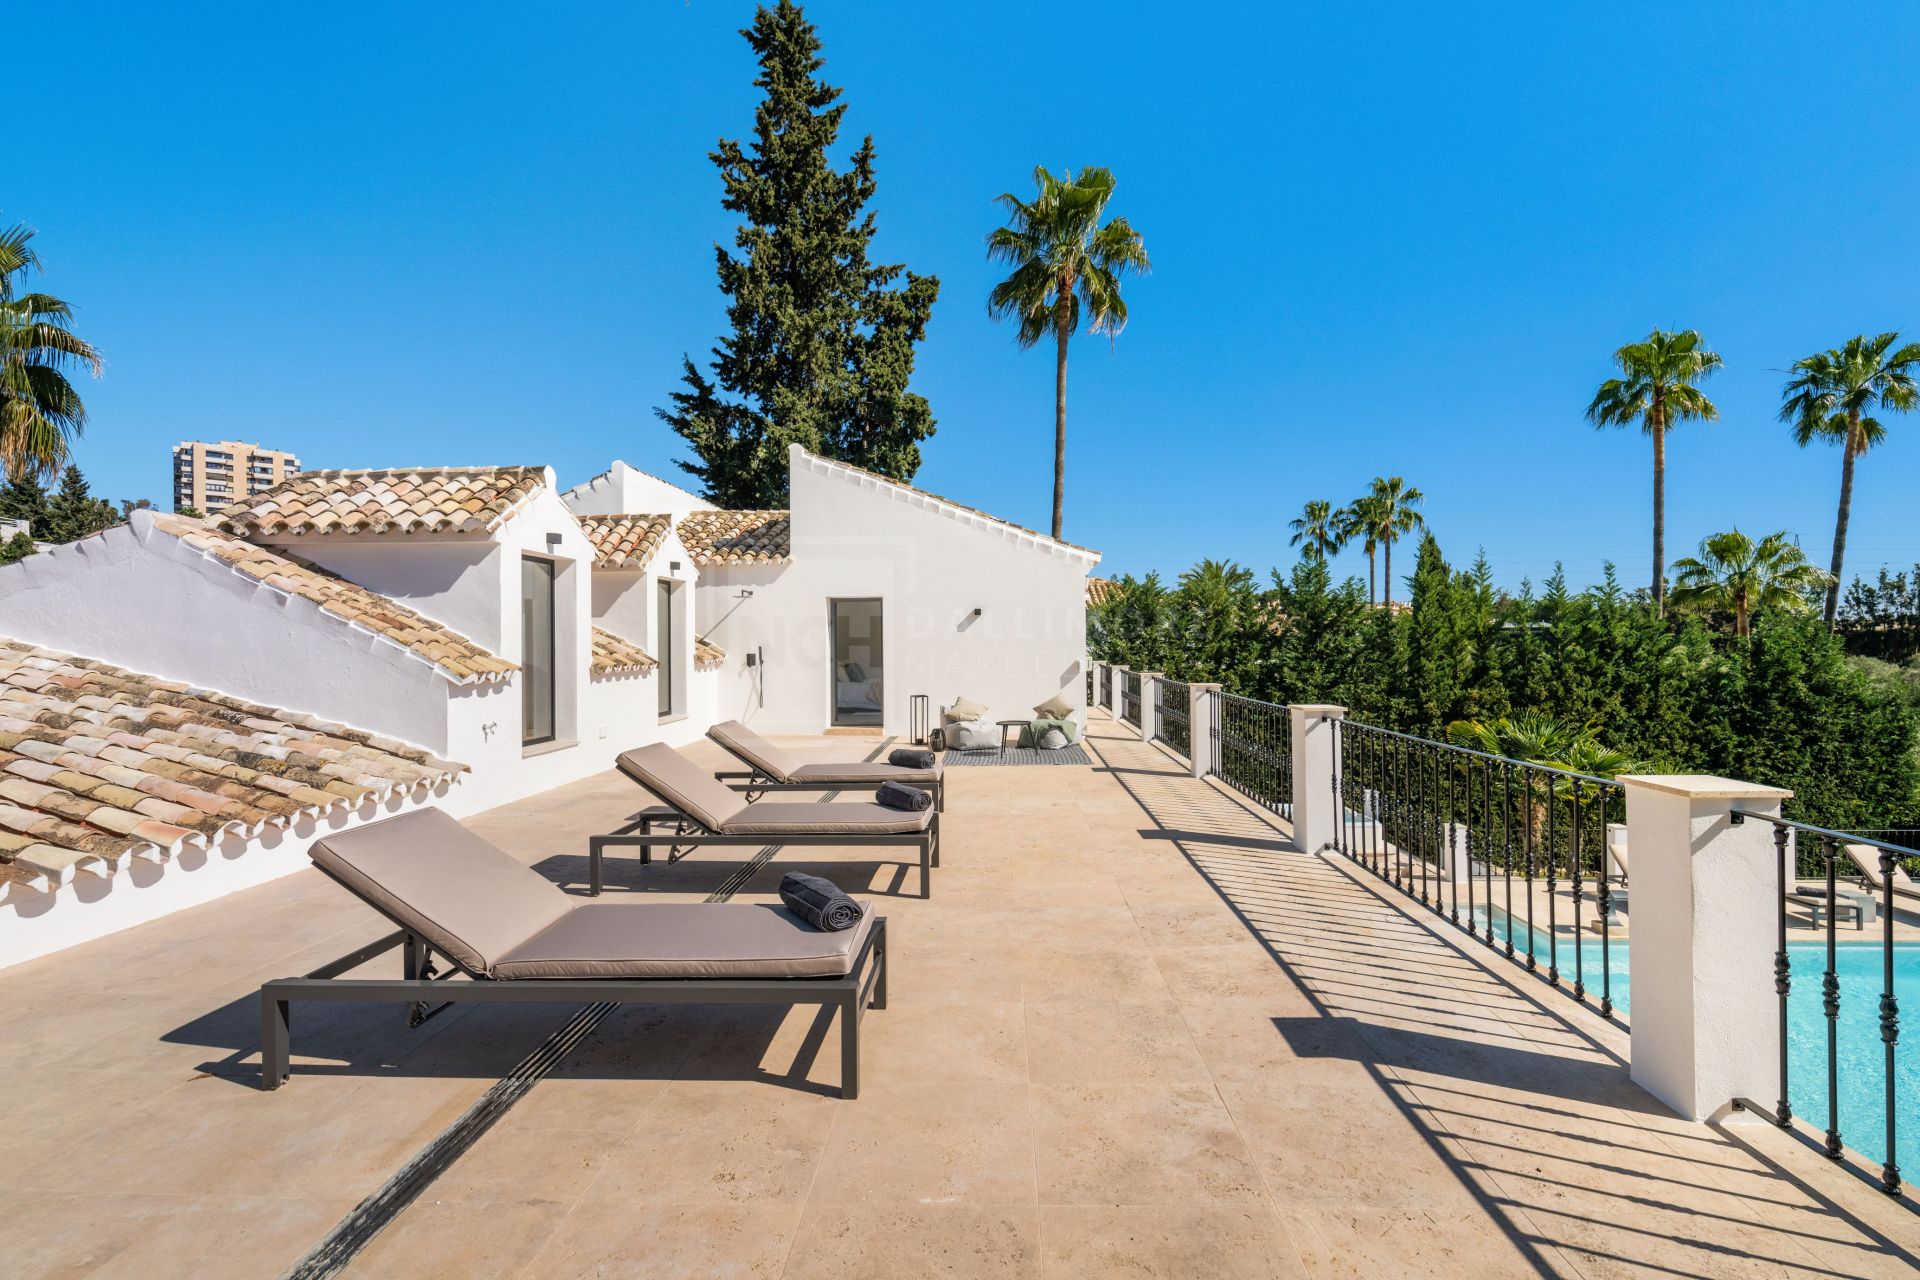 LUXURY GOLF-SIDE PROPERTY IN ONE OF MARBELLA'S EXCLUSIVE GATED COMMUNITIES